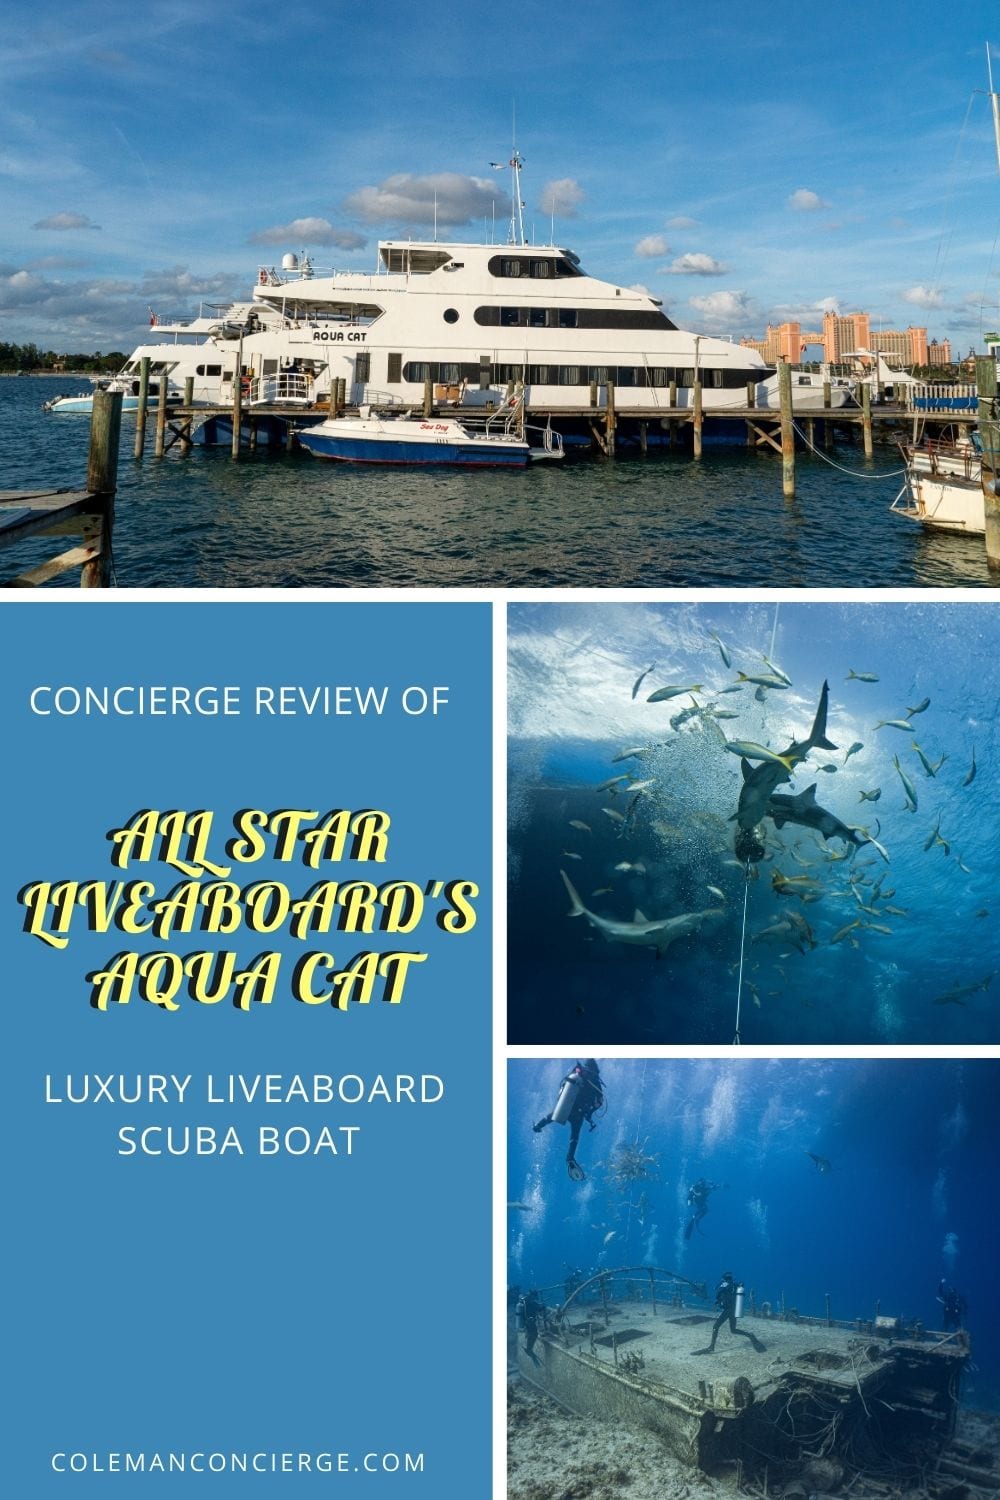 Image od Aqua Cat dive boat and 2 images of scuba diving in the Bahamas